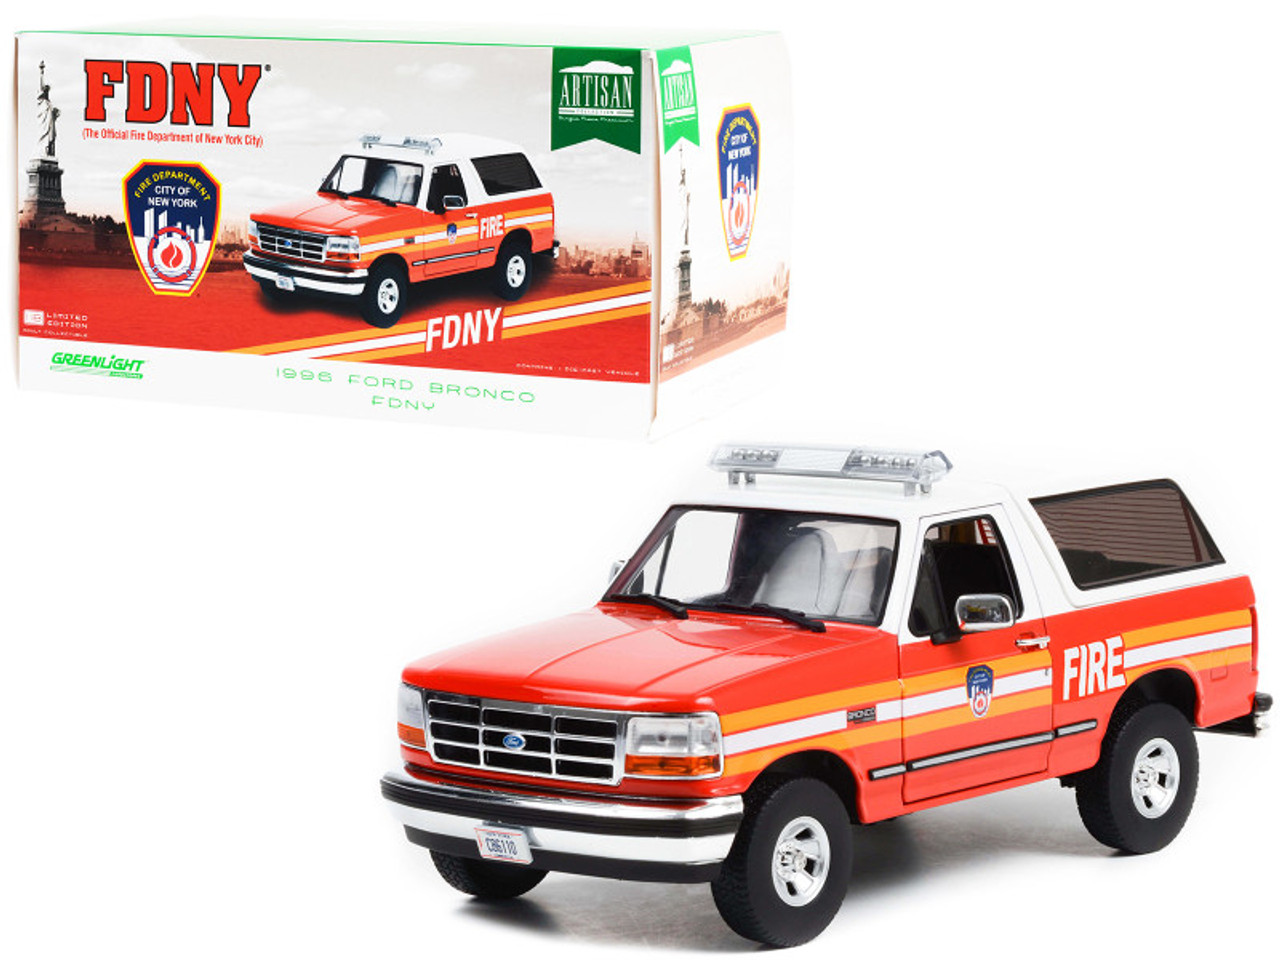 1/18 Greenlight 1996 Ford Bronco Police Red and White FDNY (The Official Fire Department the City of New York) "Artisan Collection" Diecast Car Model